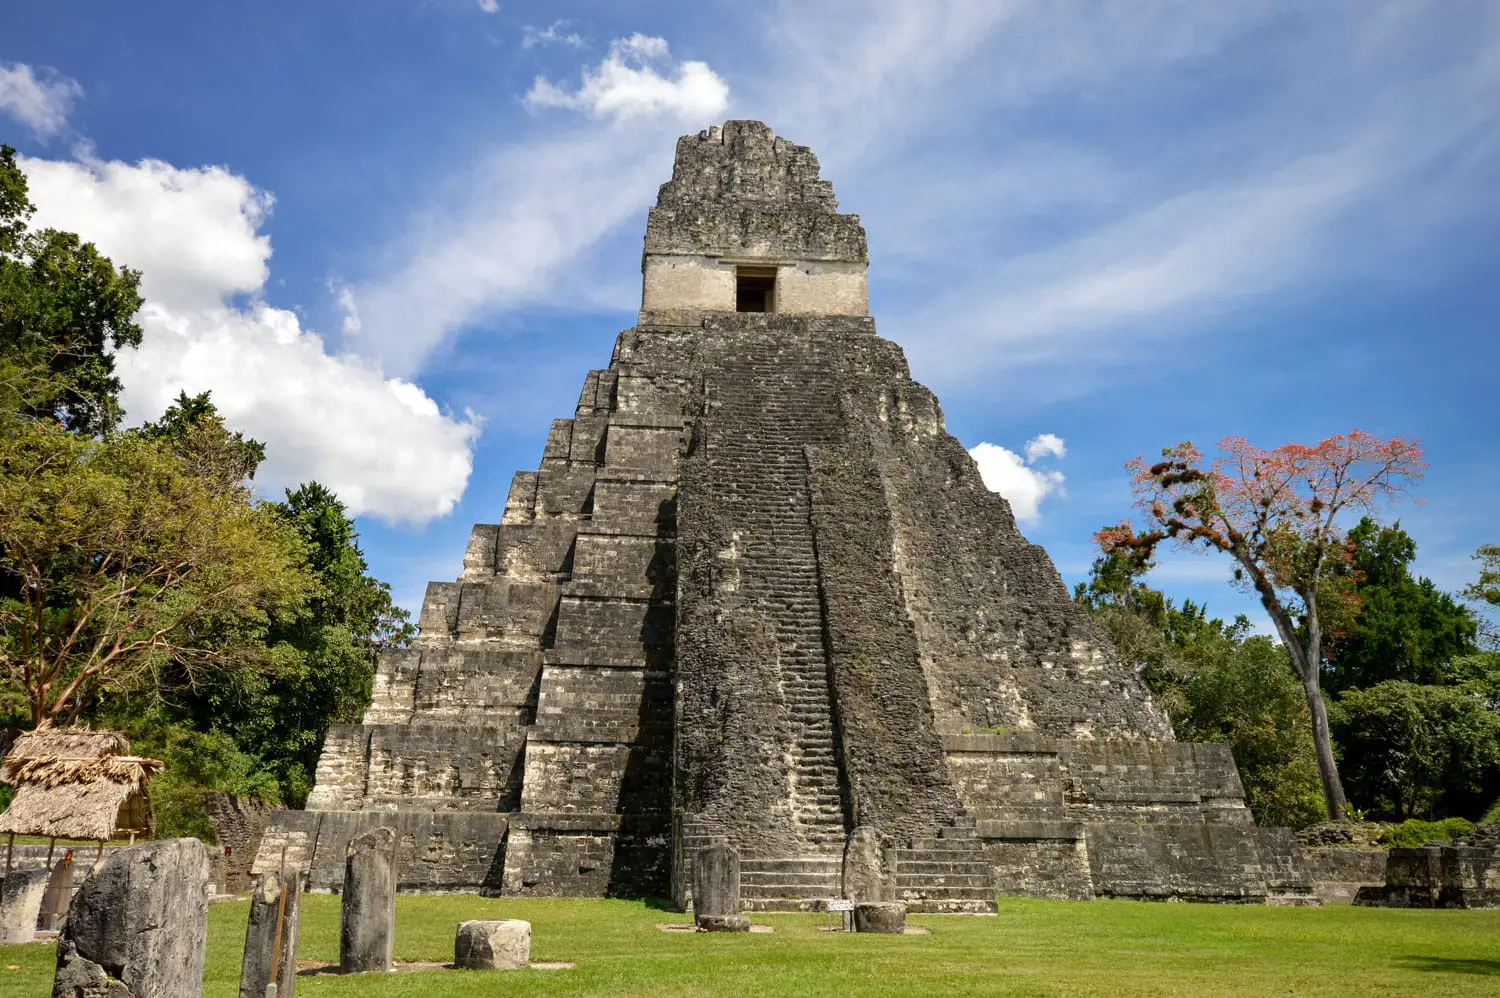 Temple I of the Maya archaeological site of Tikal in Peten, Guatemala. Central America